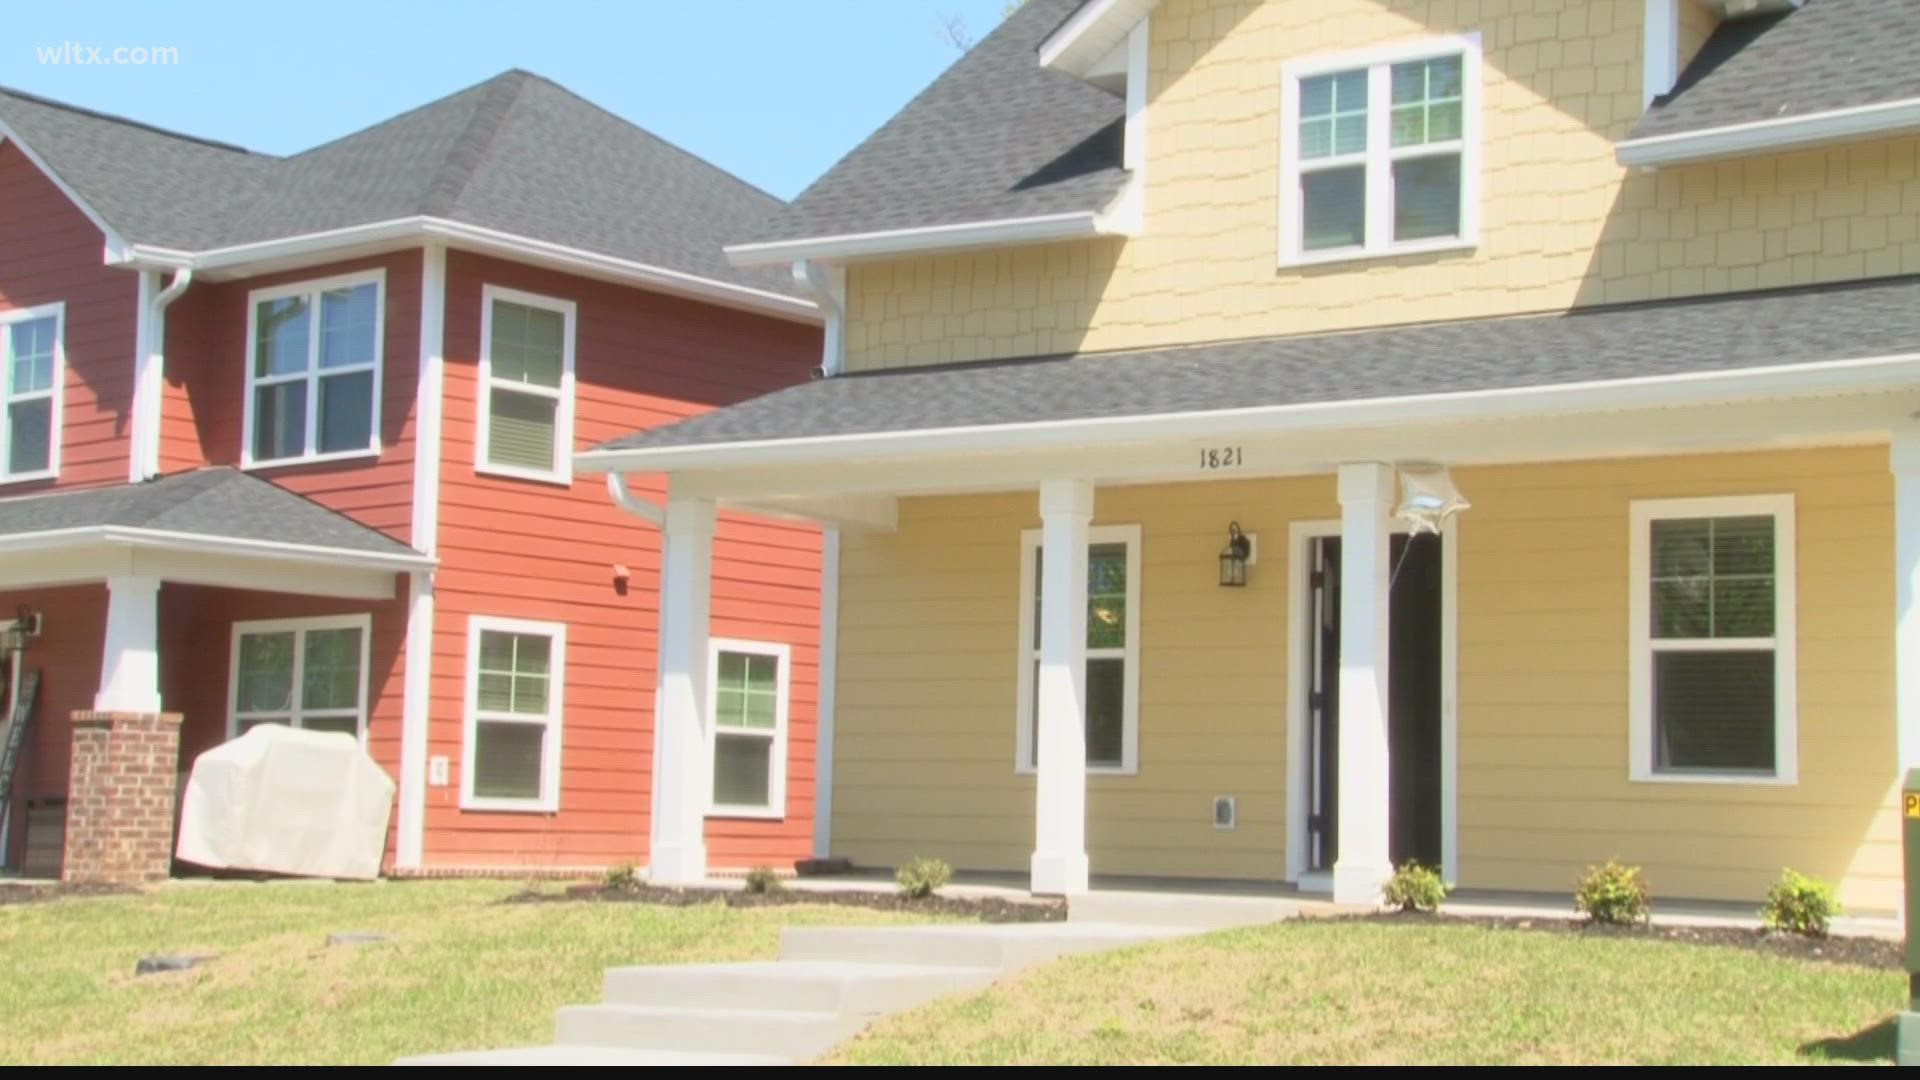 Columbia Community Development and Homes of Hope held a ribbon cutting ceremony to celebrate the opening of Edisto Place, an affordable housing subdivision.